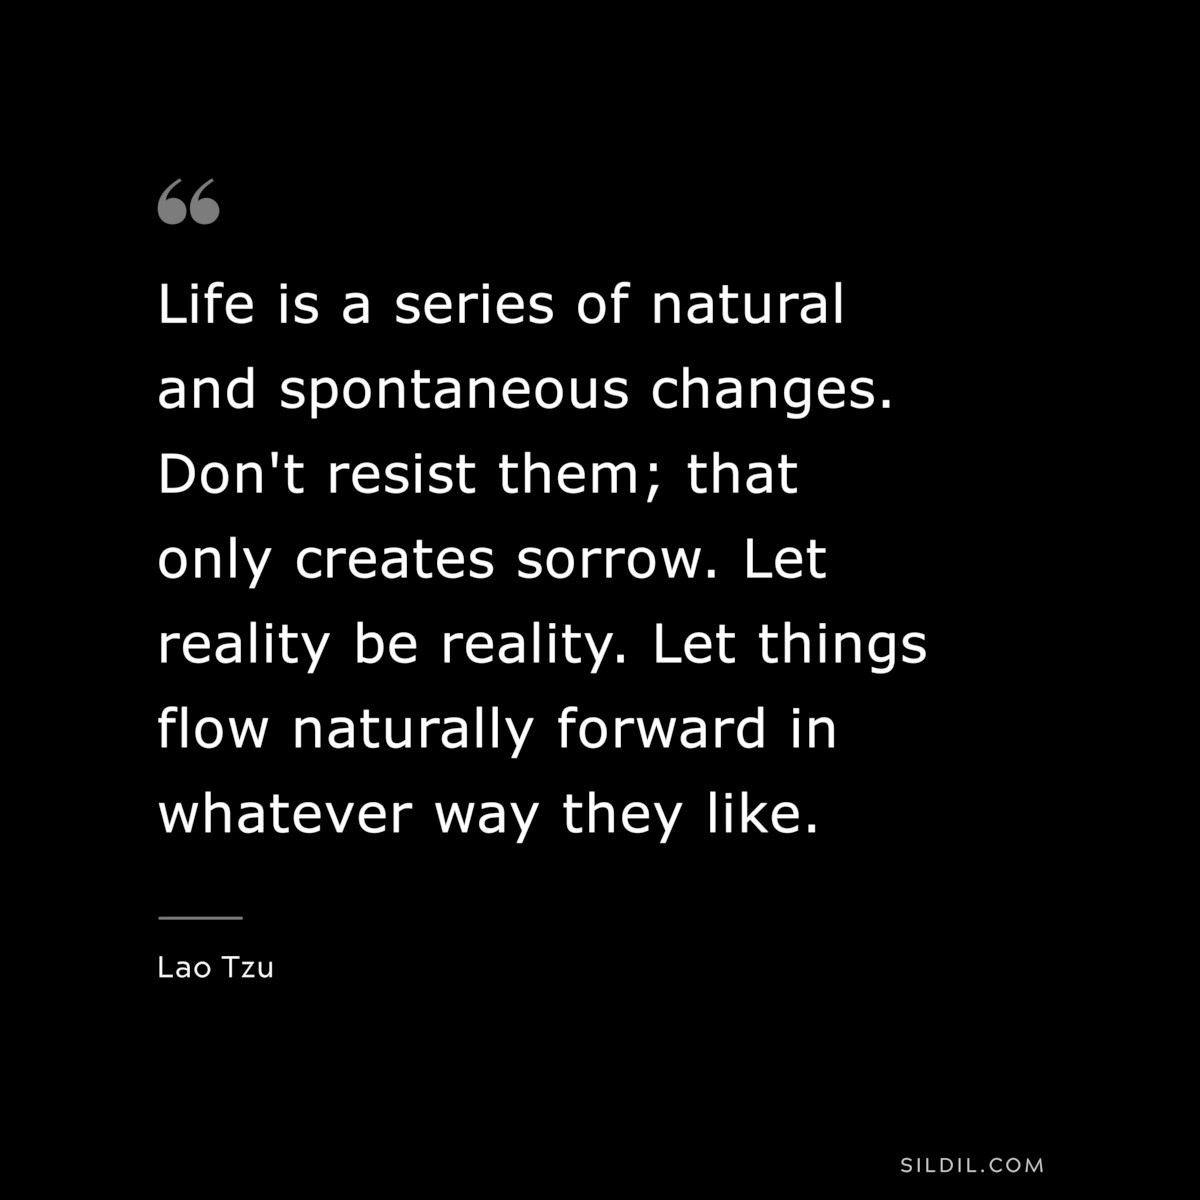 Life is a series of natural and spontaneous changes. Don't resist them; that only creates sorrow. Let reality be reality. Let things flow naturally forward in whatever way they like. ― Lao Tzu